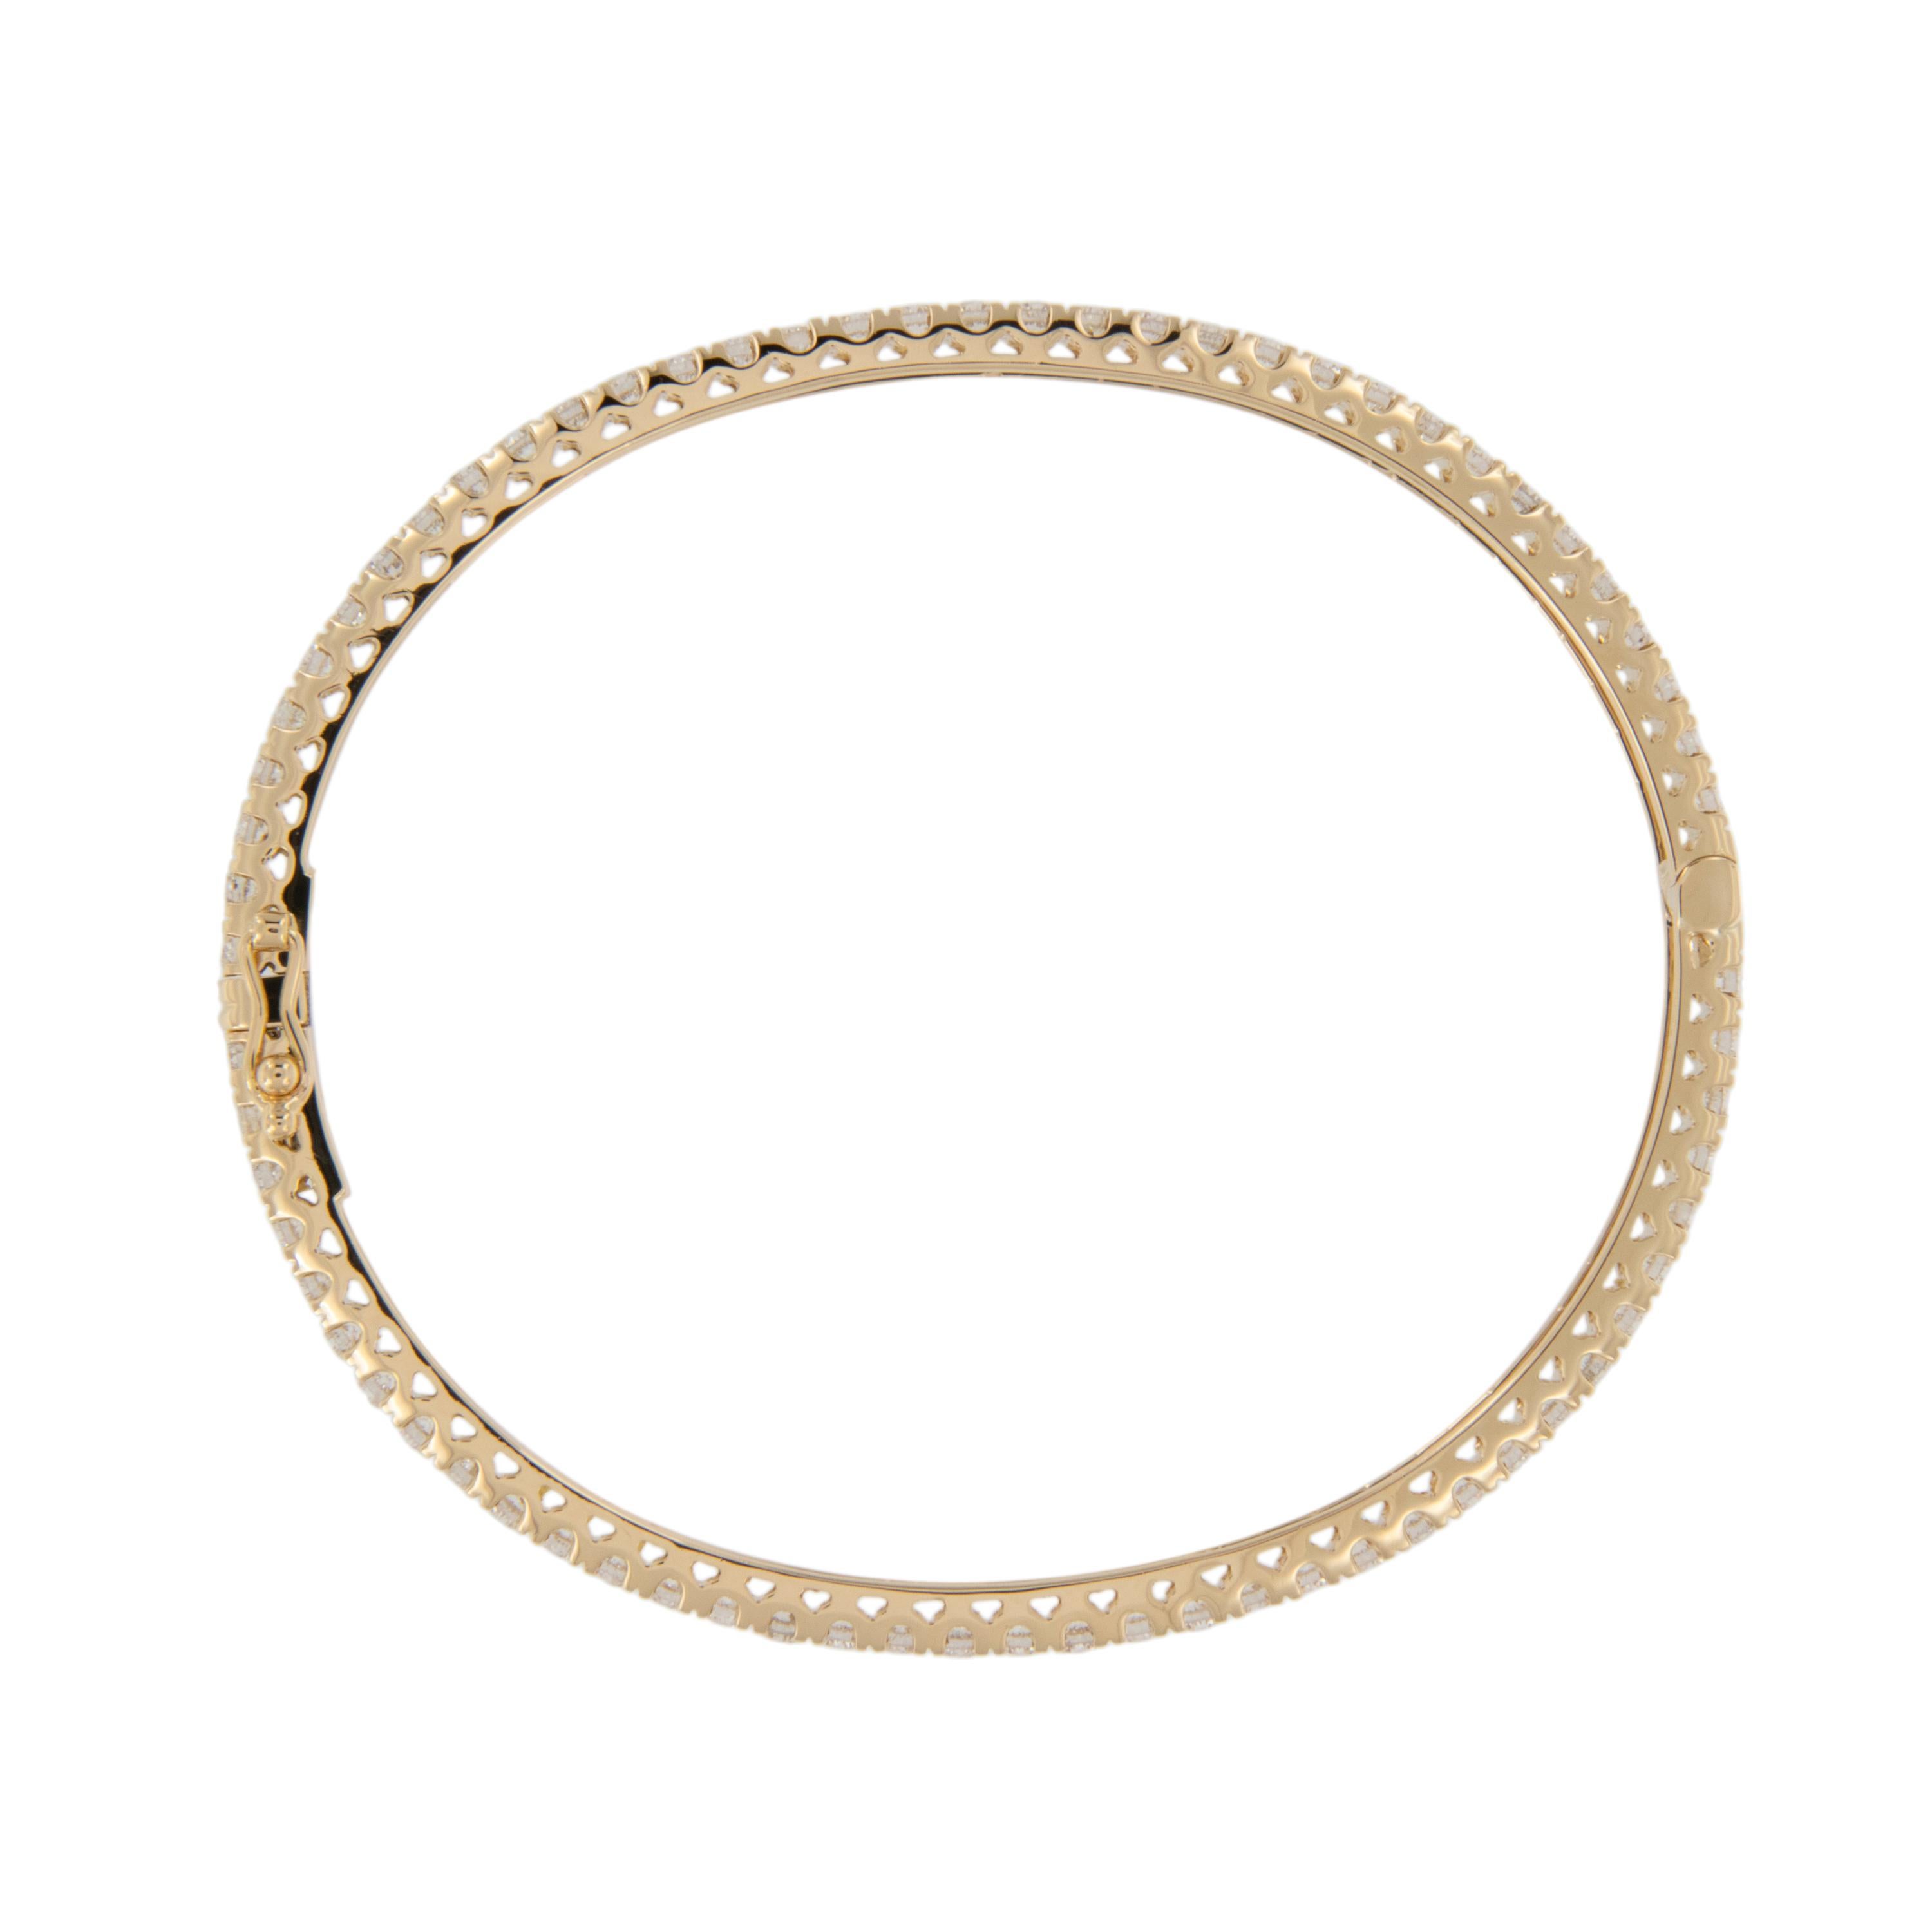 Contemporary 18 Karat Yellow Gold 3.15 Cttw Eternity Diamond Bangle Bracelet Made in Italy For Sale